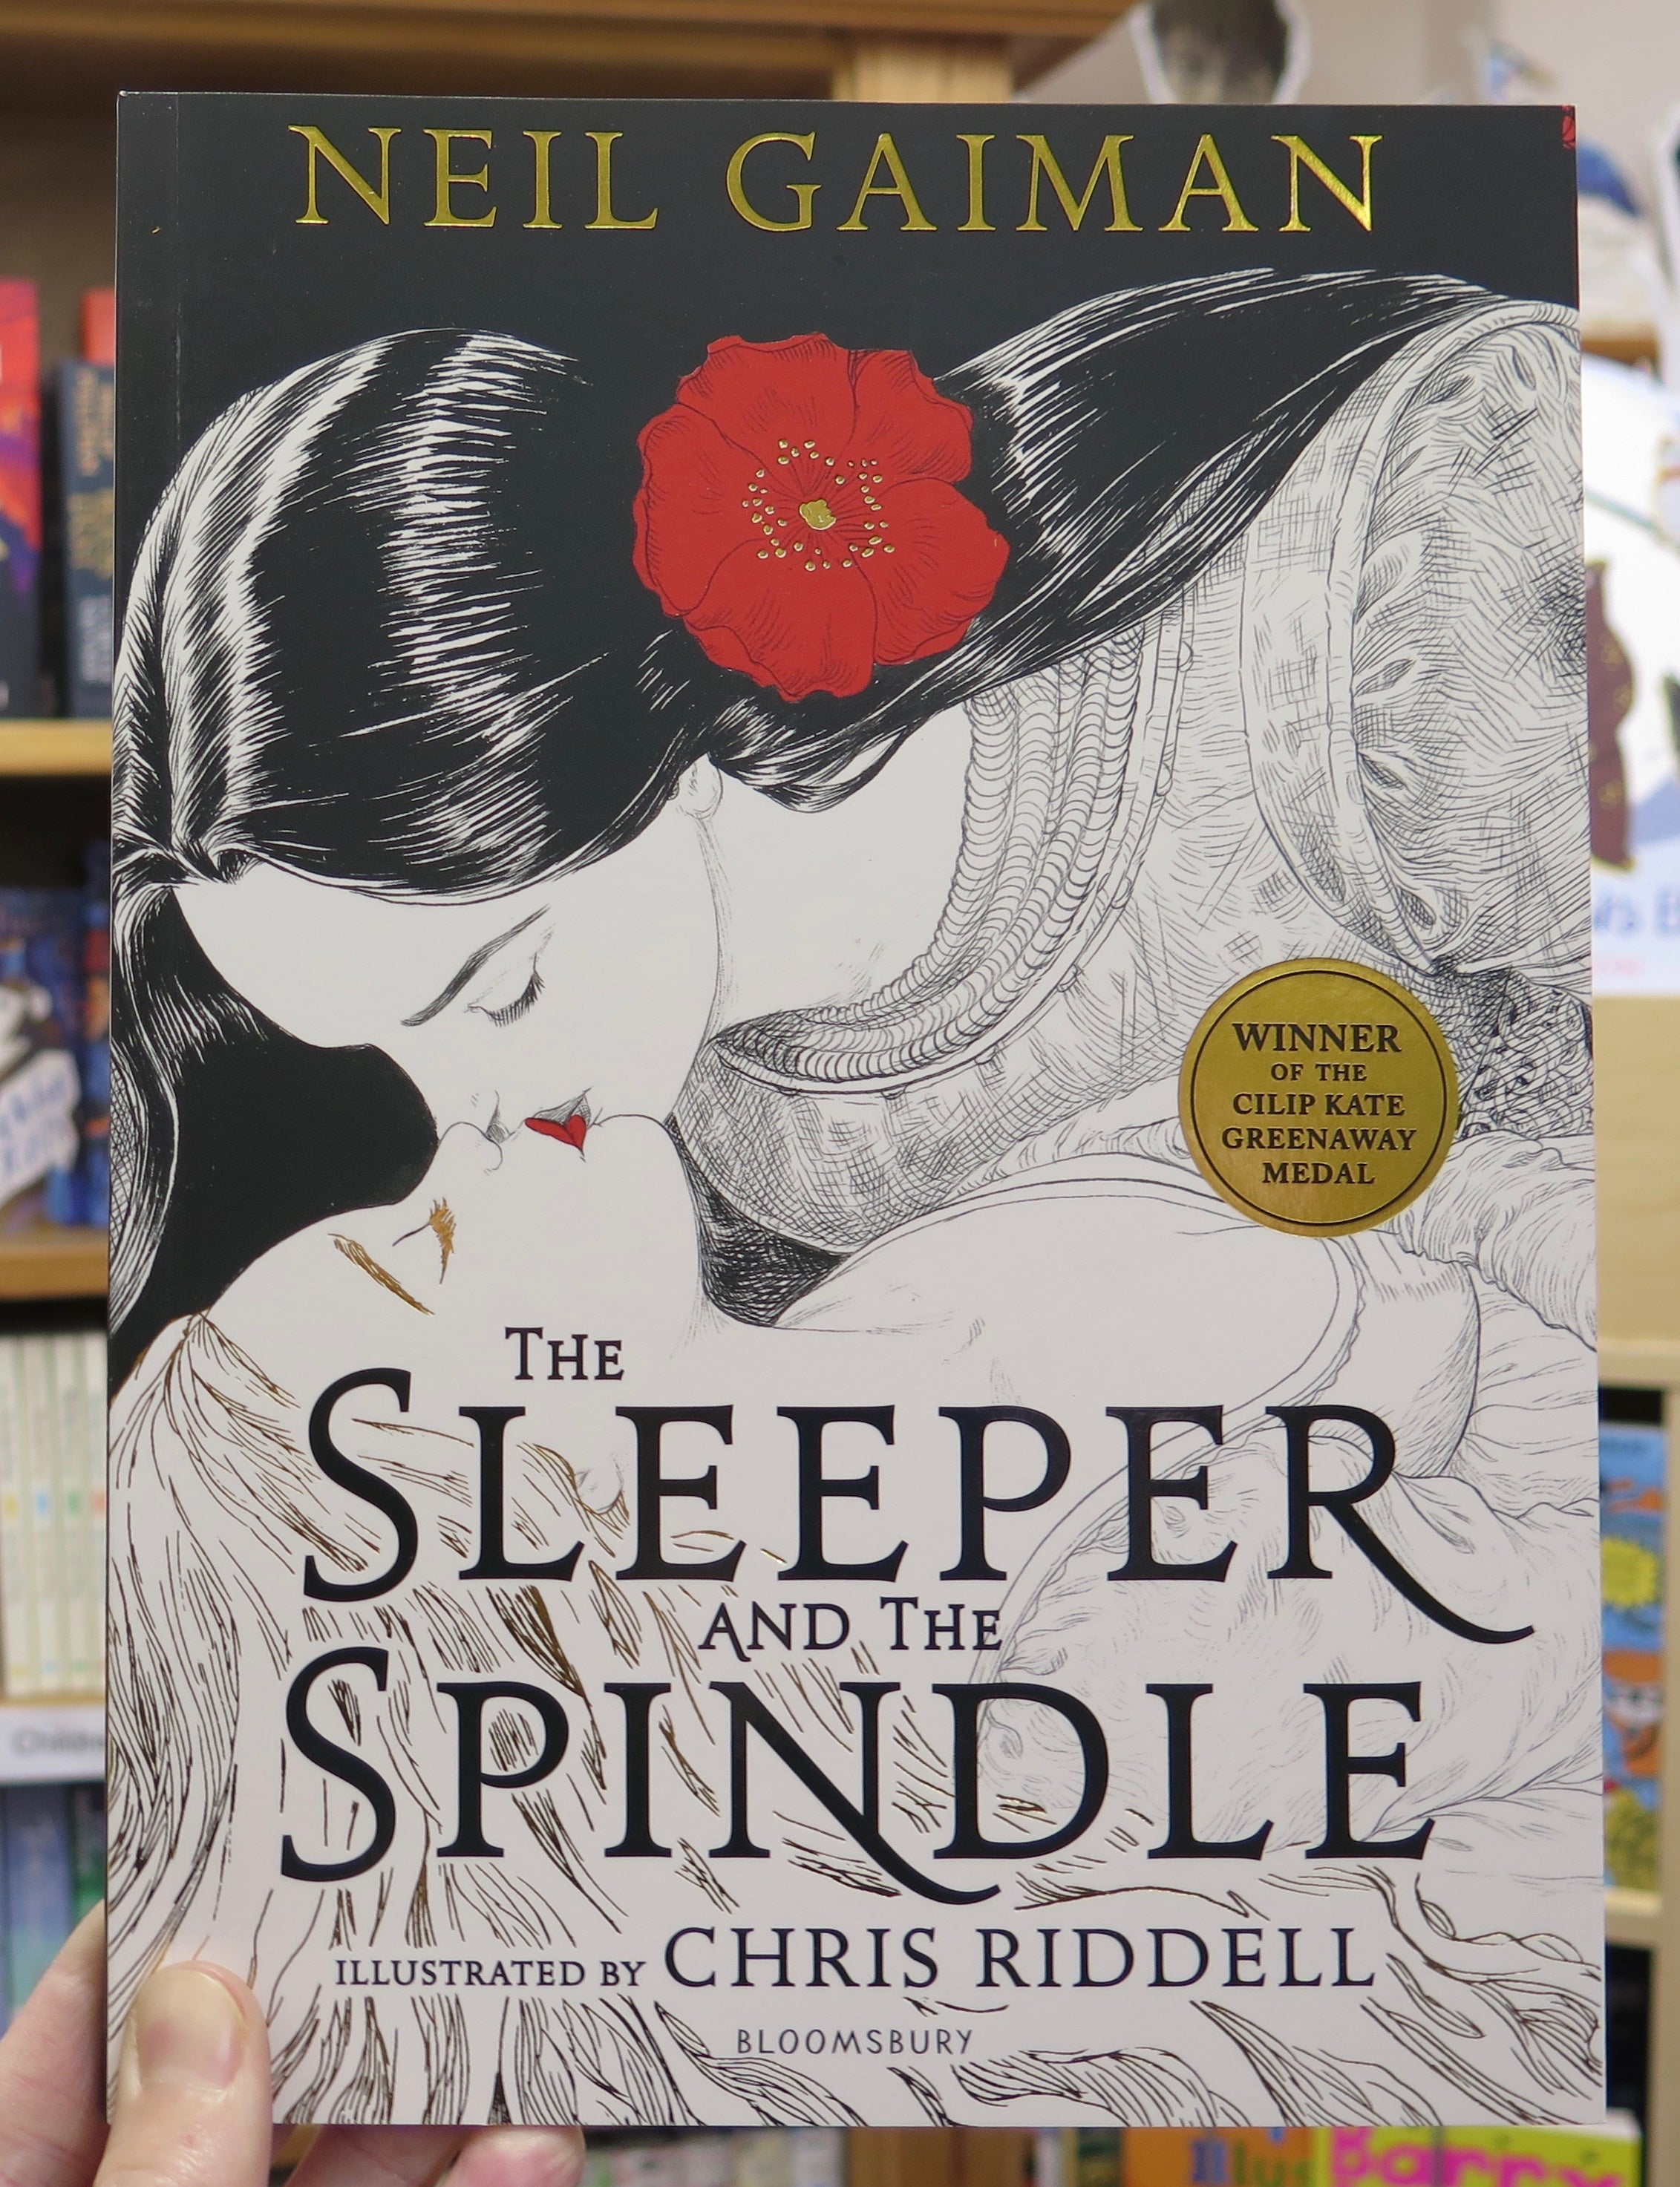 and　Neil　Riddell　Chris　Spindle　Gaiman　(ill.),　Bookseller　and　the　The　Sleeper　Online　Sam　Read　Shop